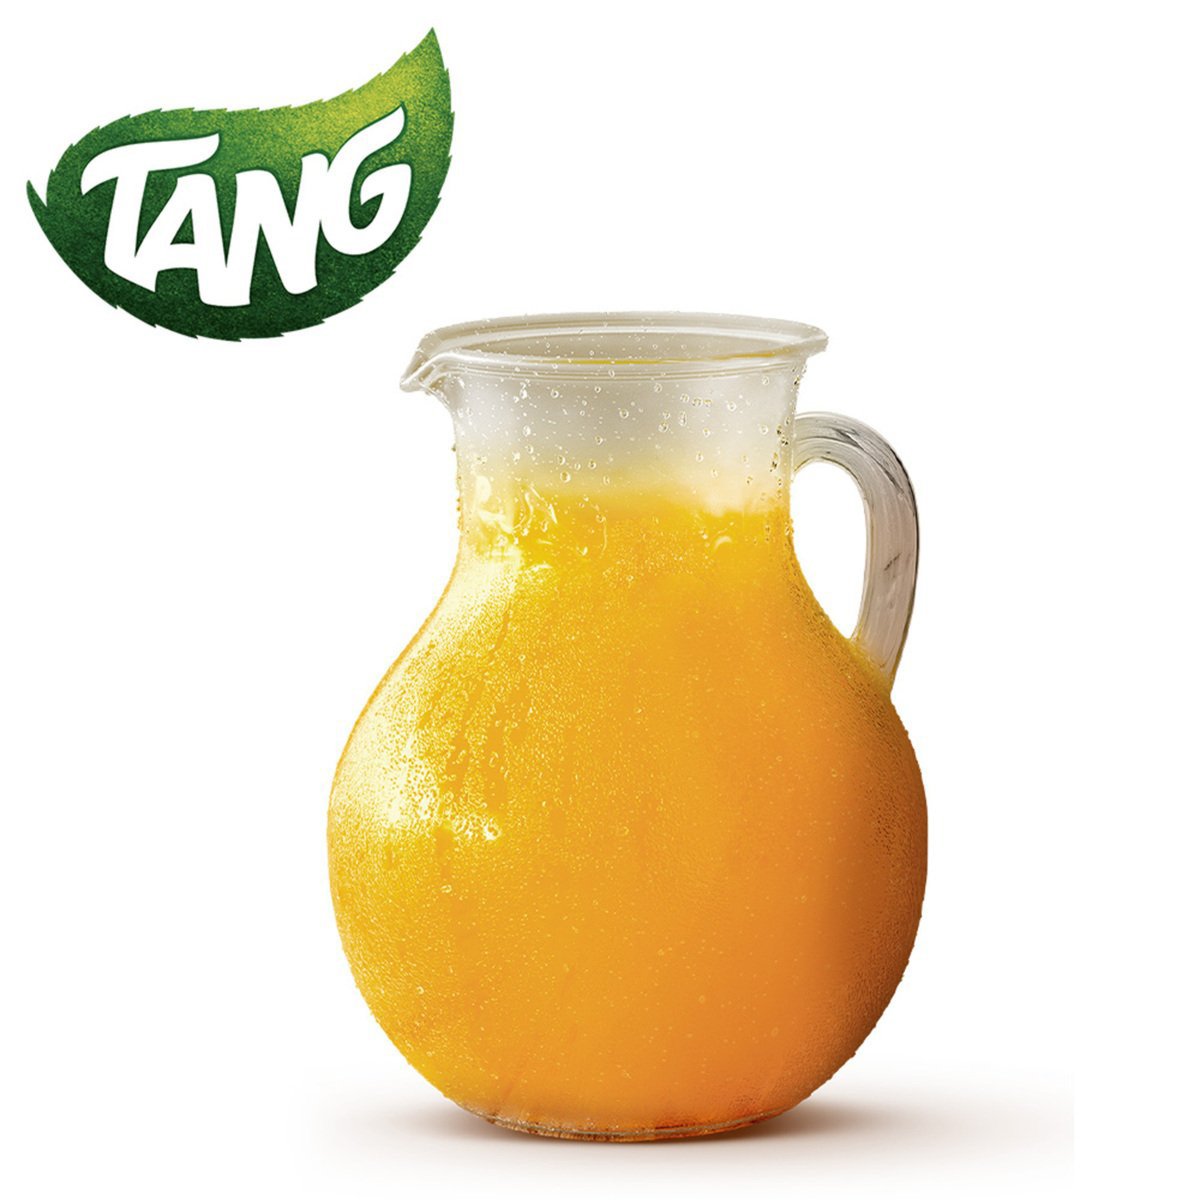 Tang Mango Instant Powdered Drink Value Pack 1 kg